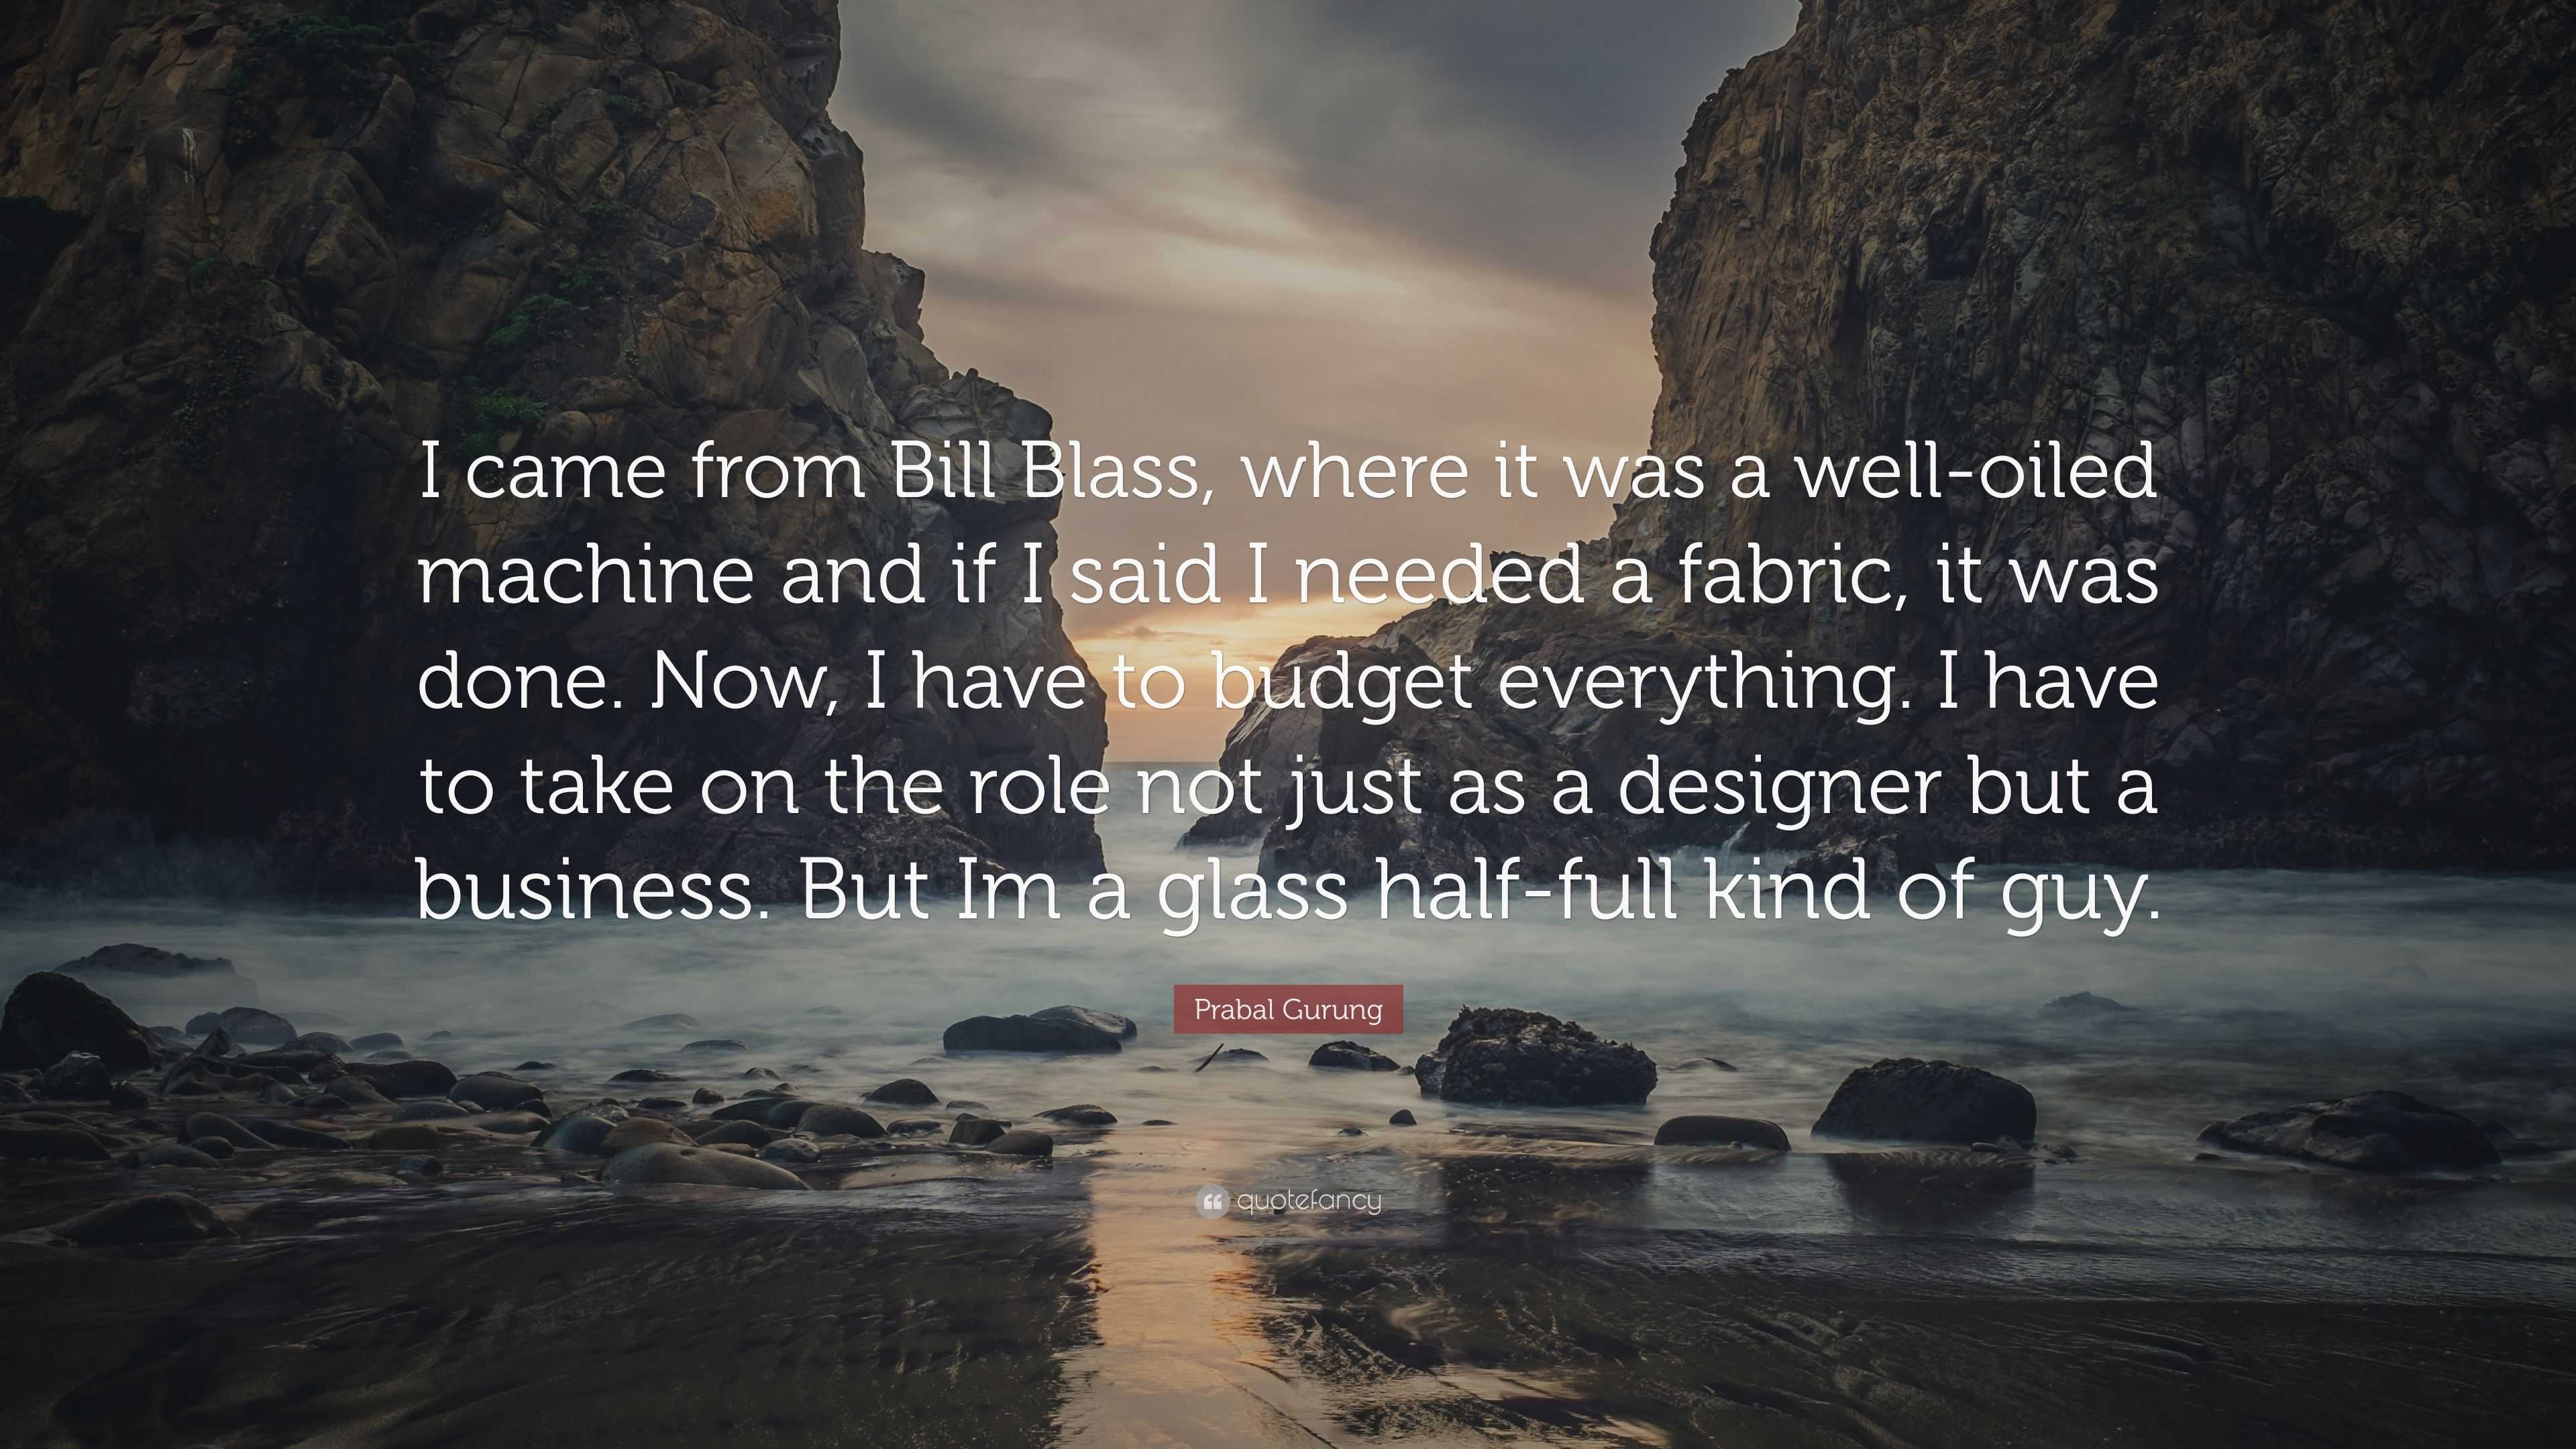 Prabal Gurung Quote: "I came from Bill Blass, where it was a well-oiled machine and if I said I ...